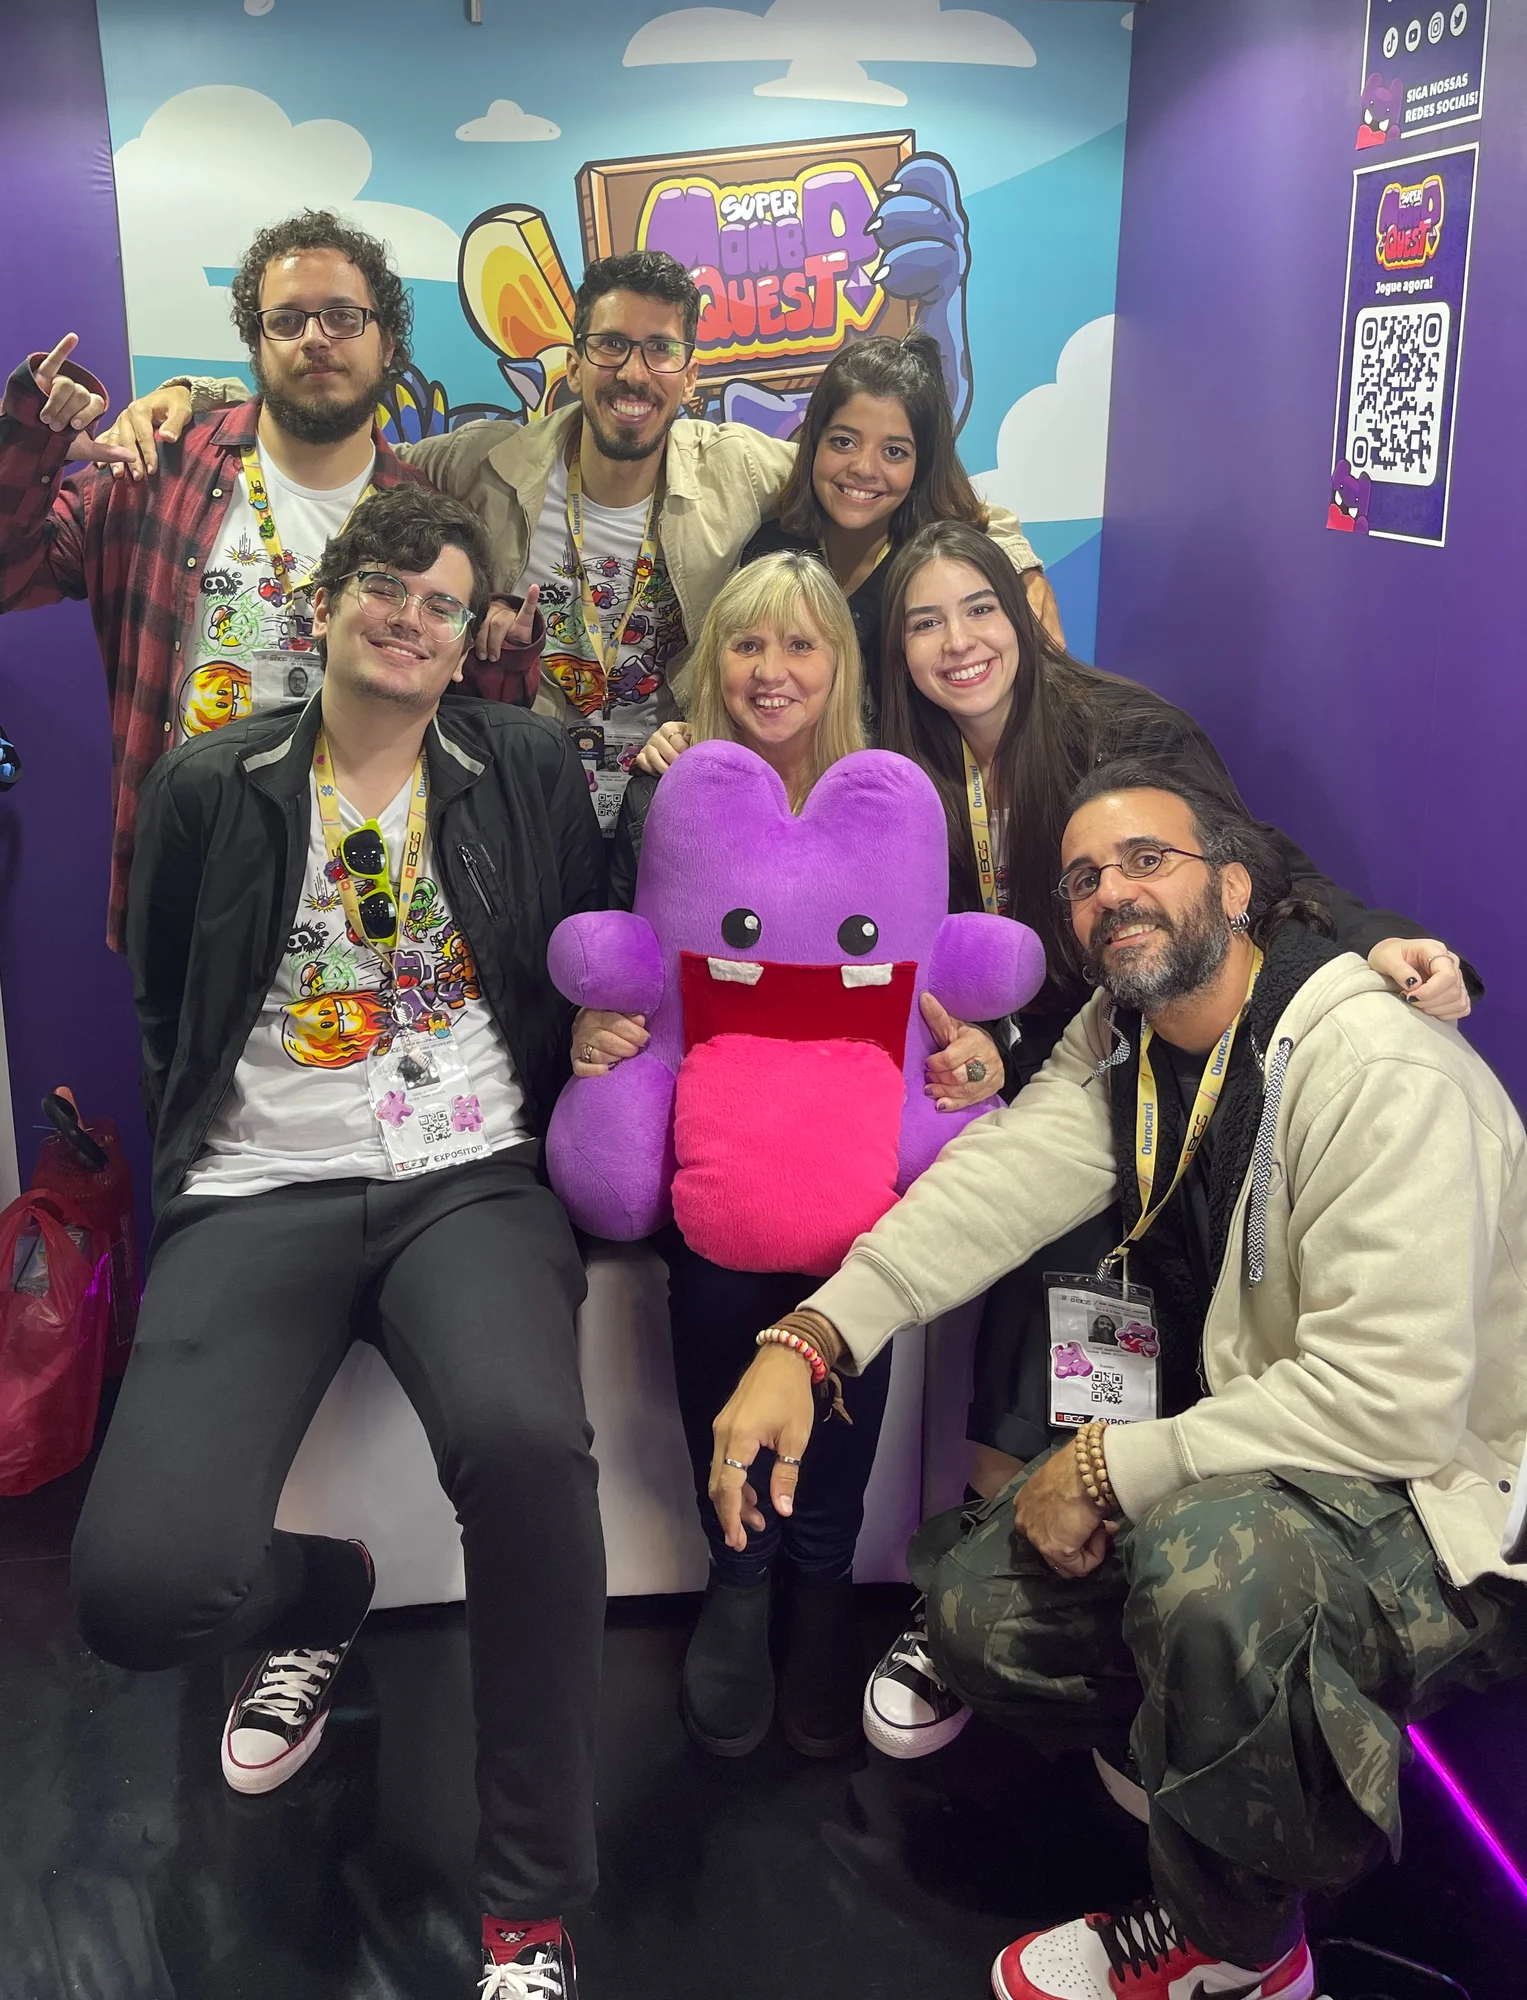 Seven people smile with a purple stuffed animal in a booth. In the background, a poster says “Super Mambo Quest.”